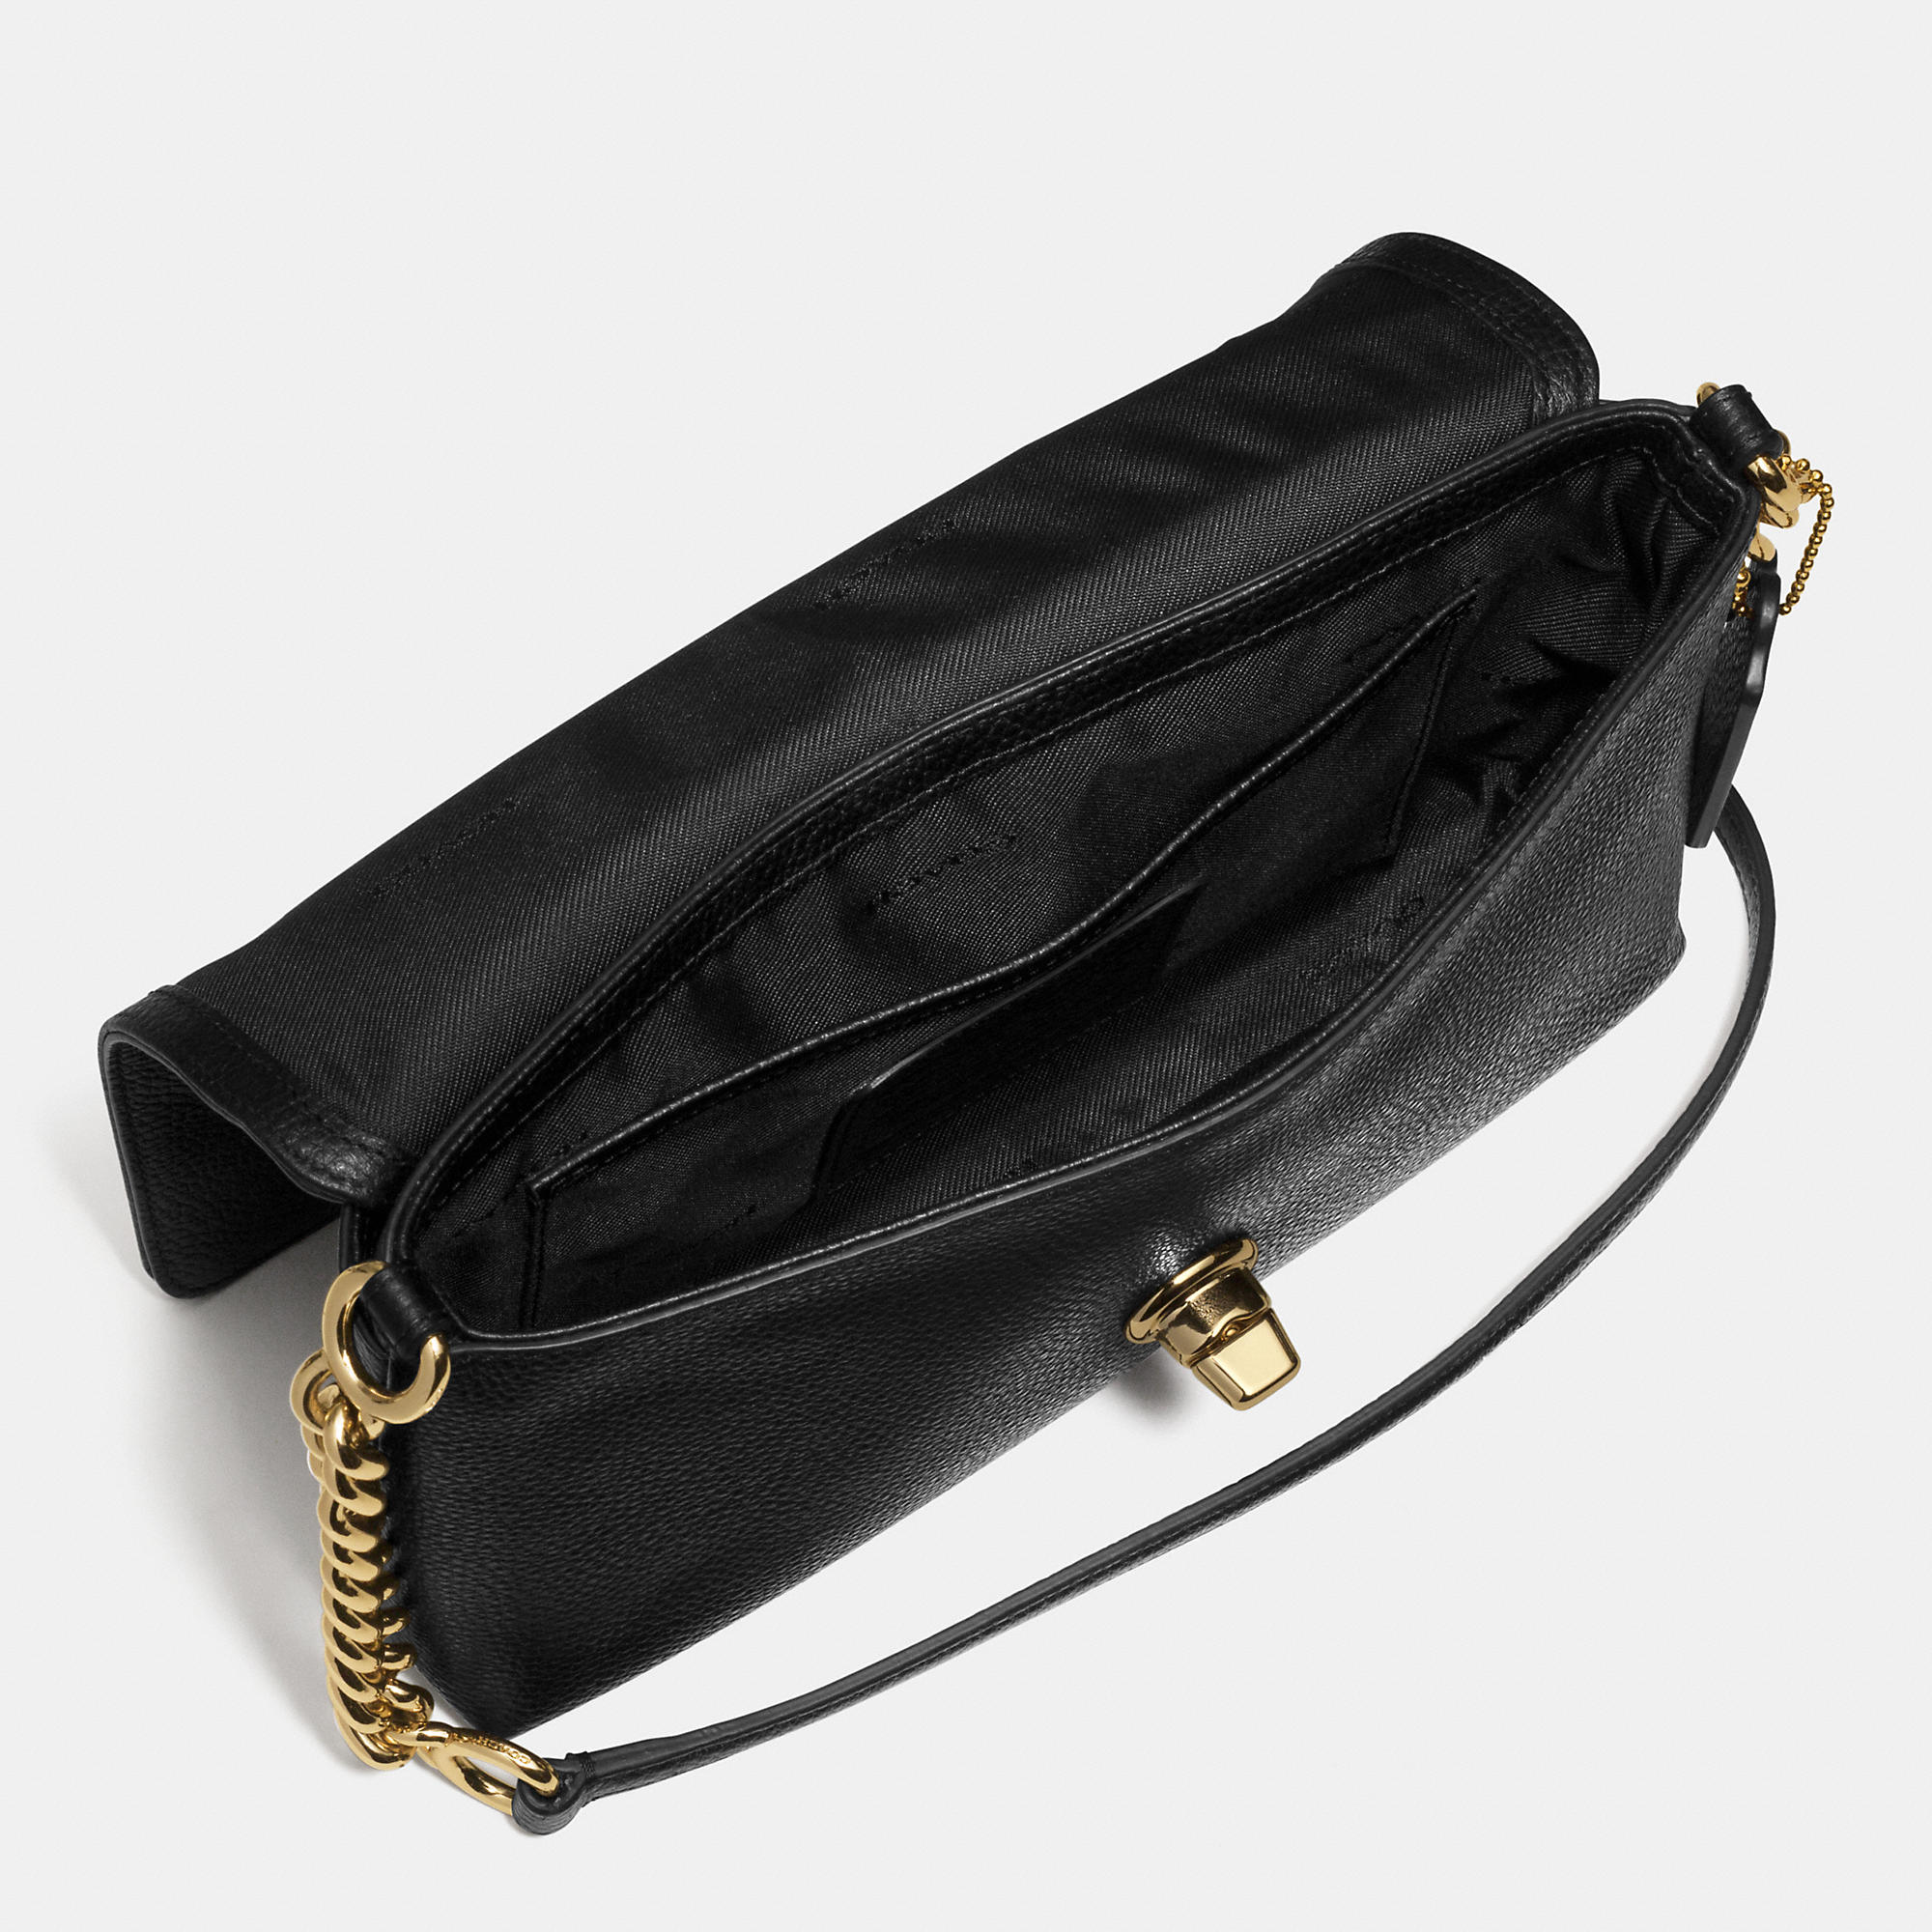 Famous Brand Coach Crosstown Crossbody In Pebble Leather